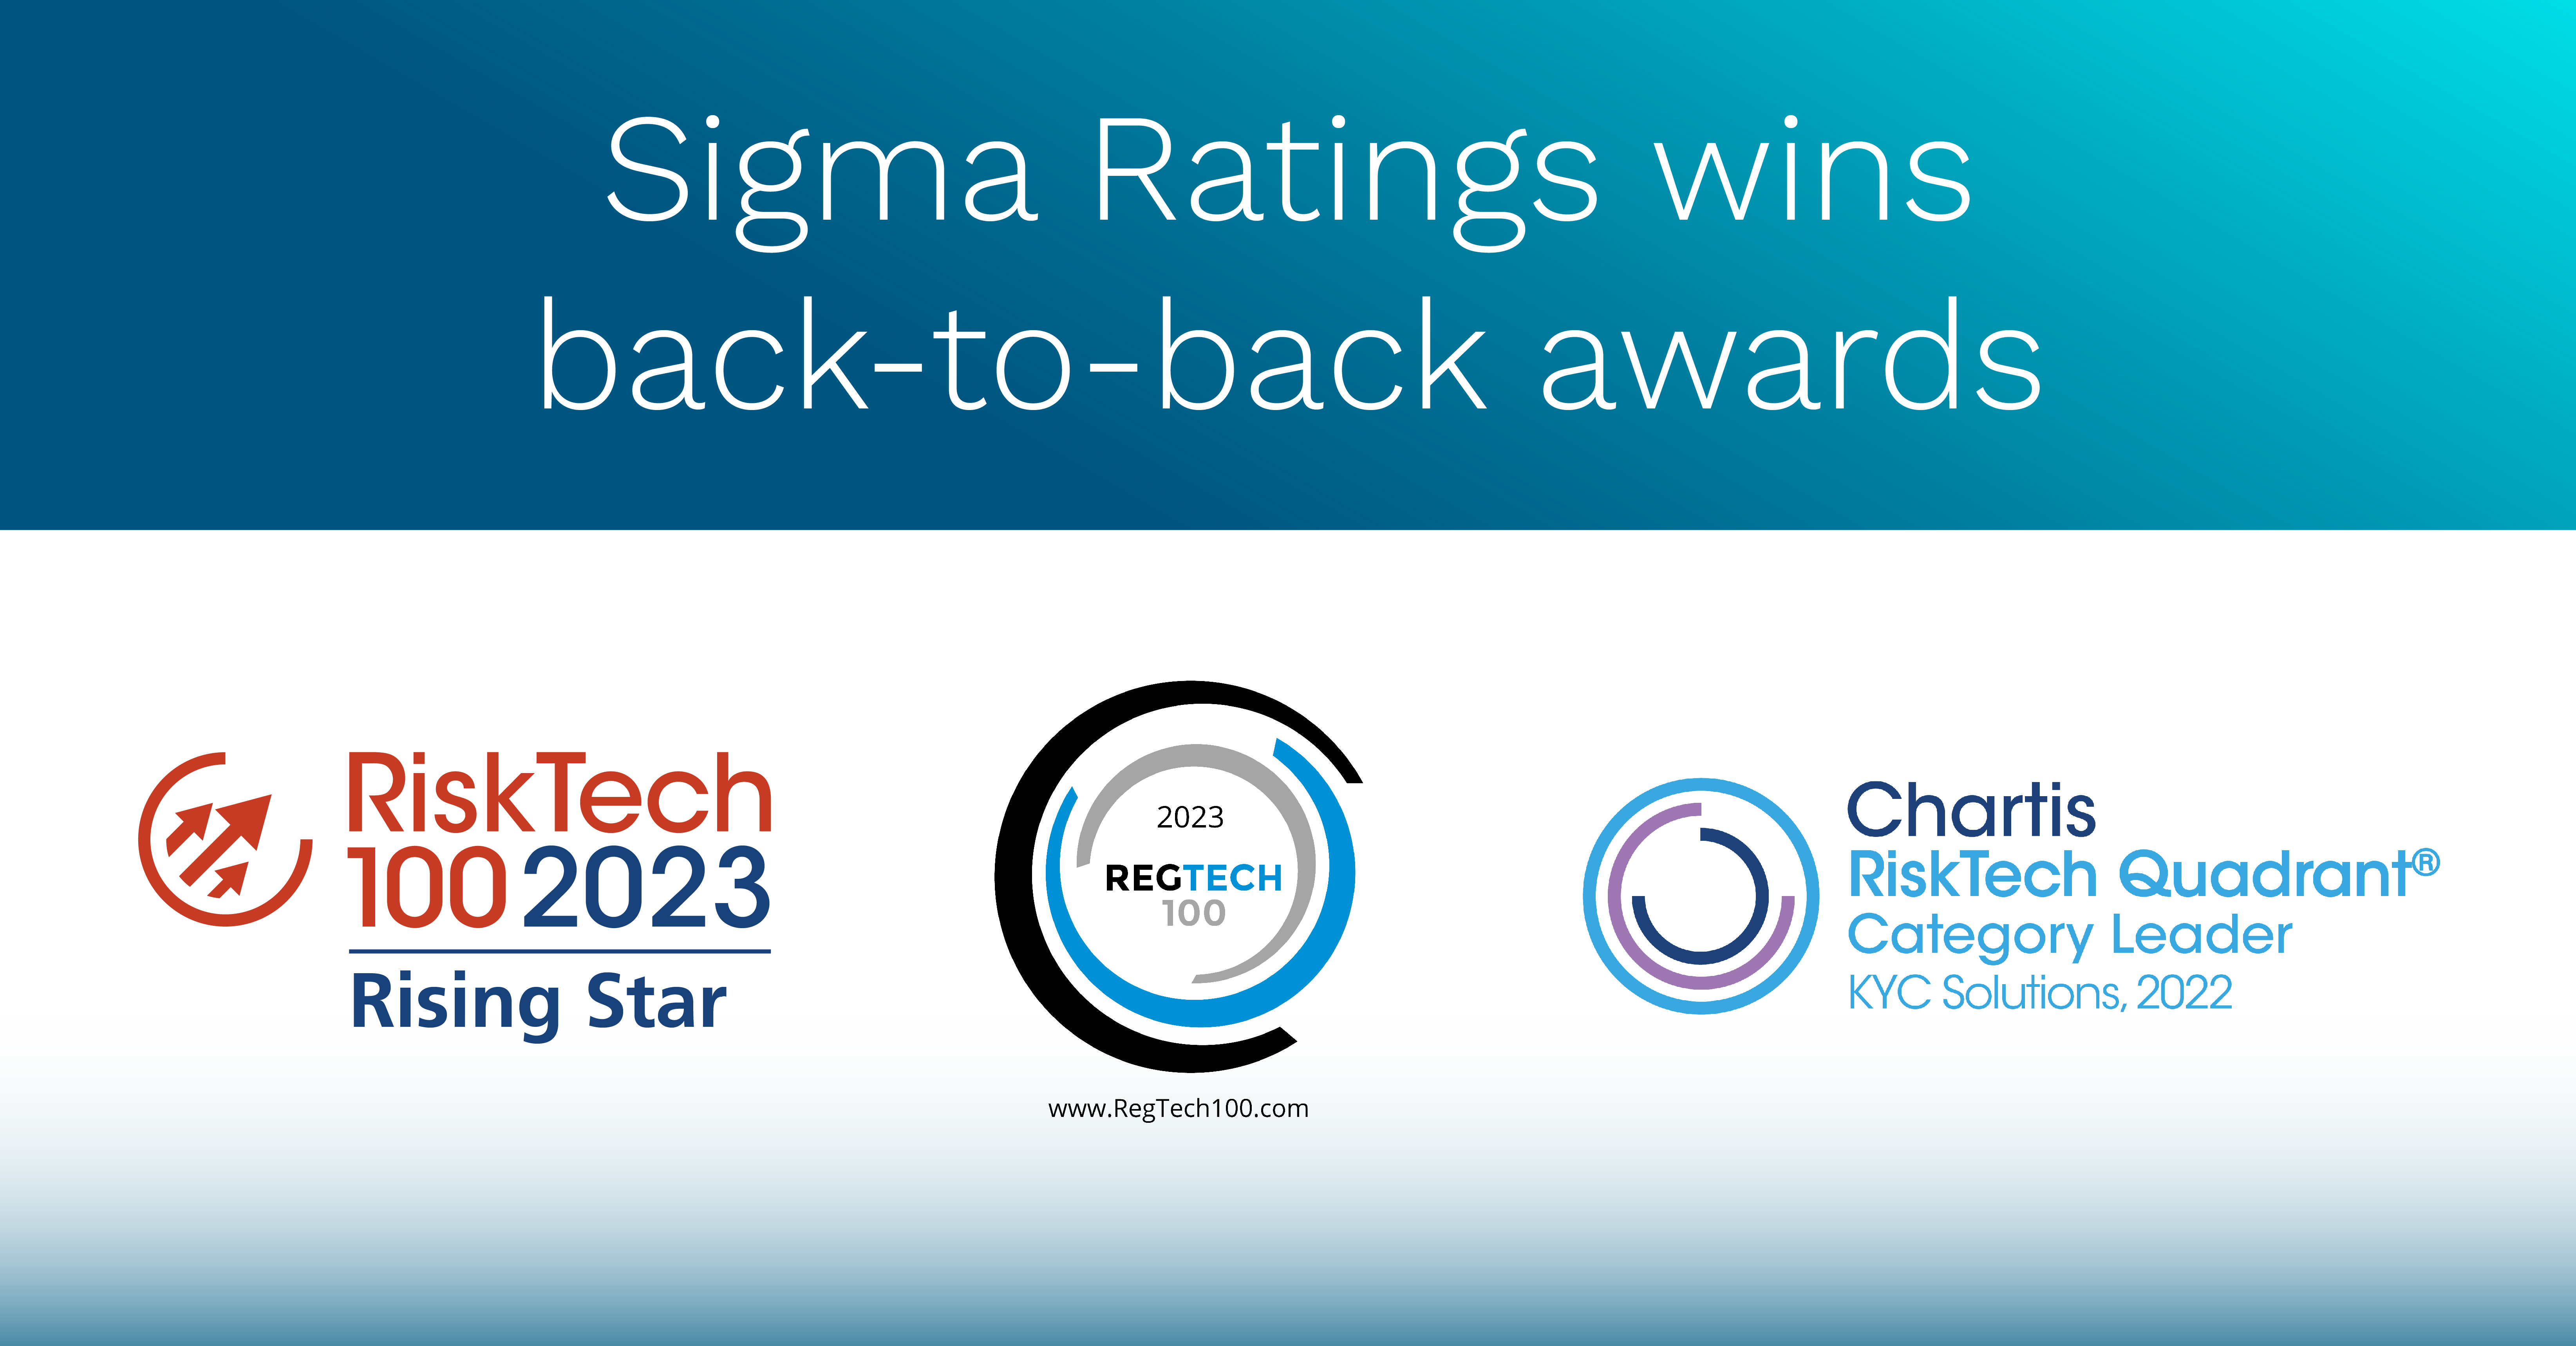 Sigma Ratings recognized on RegTech100 and as a KYC Leader by Chartis